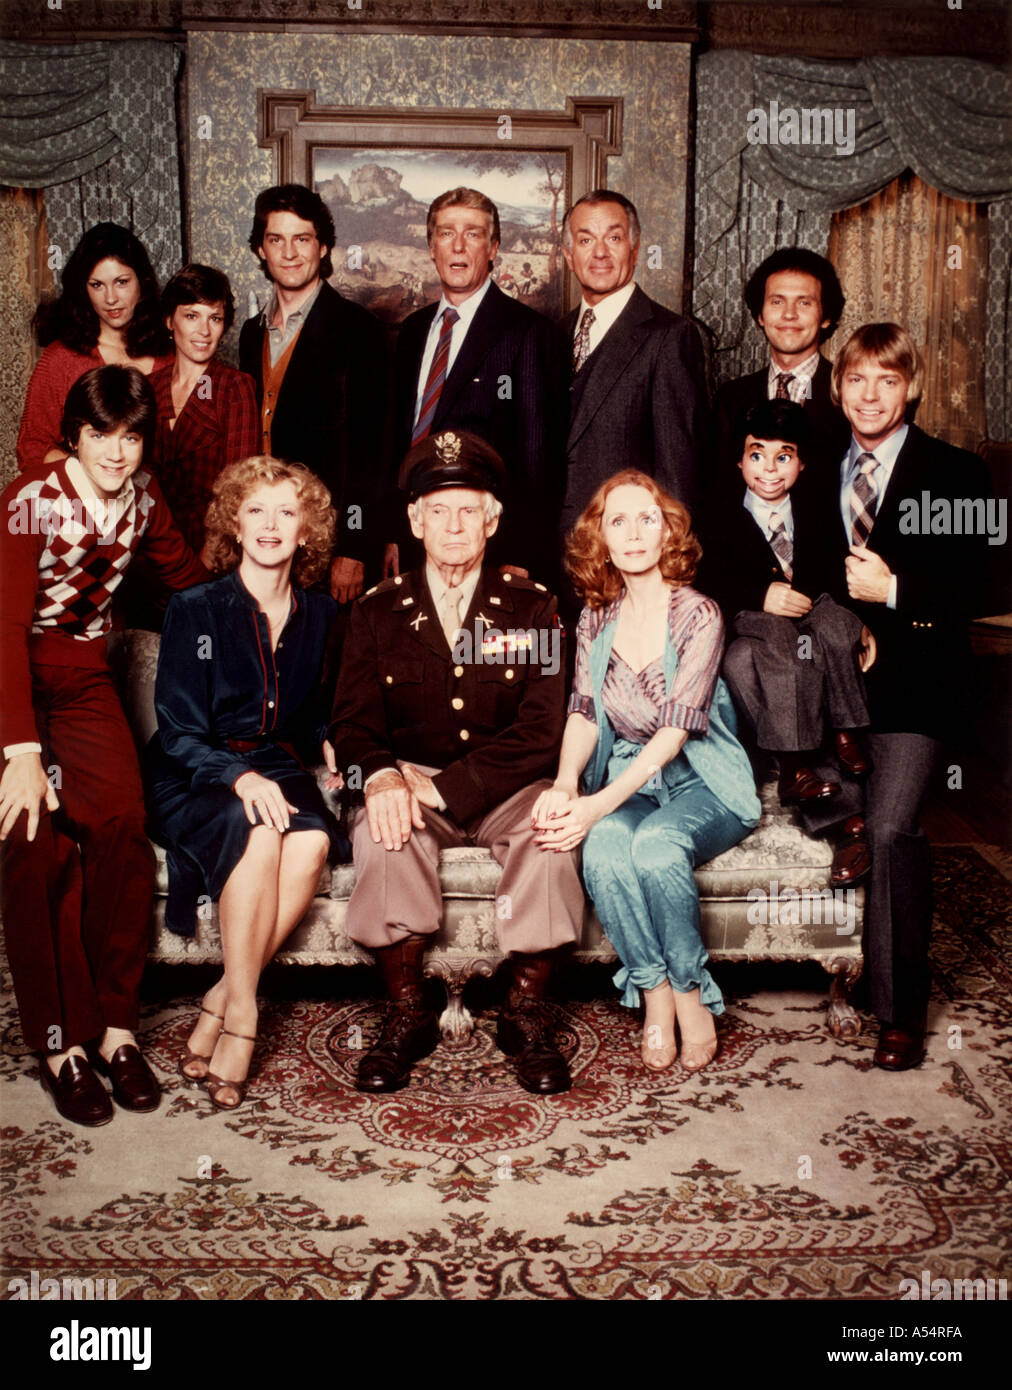 the soap tv show